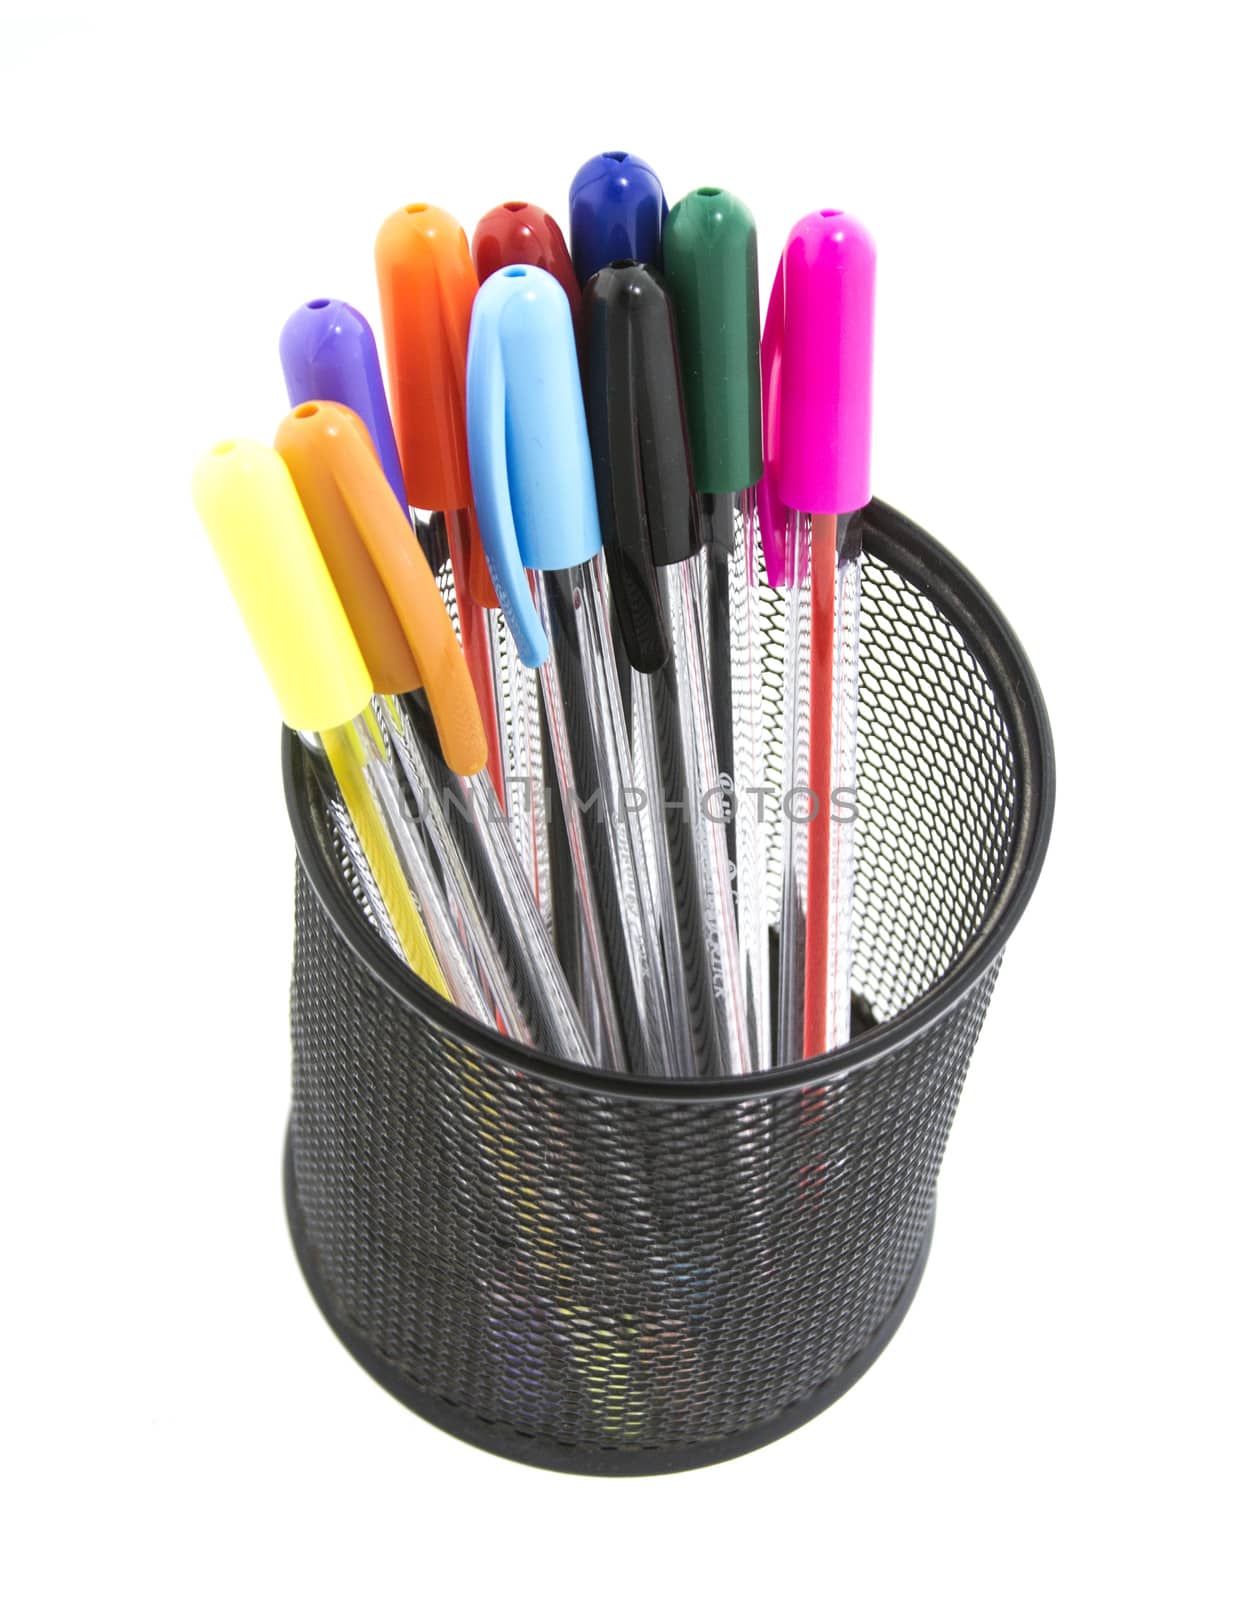 pen and pencils container by designsstock